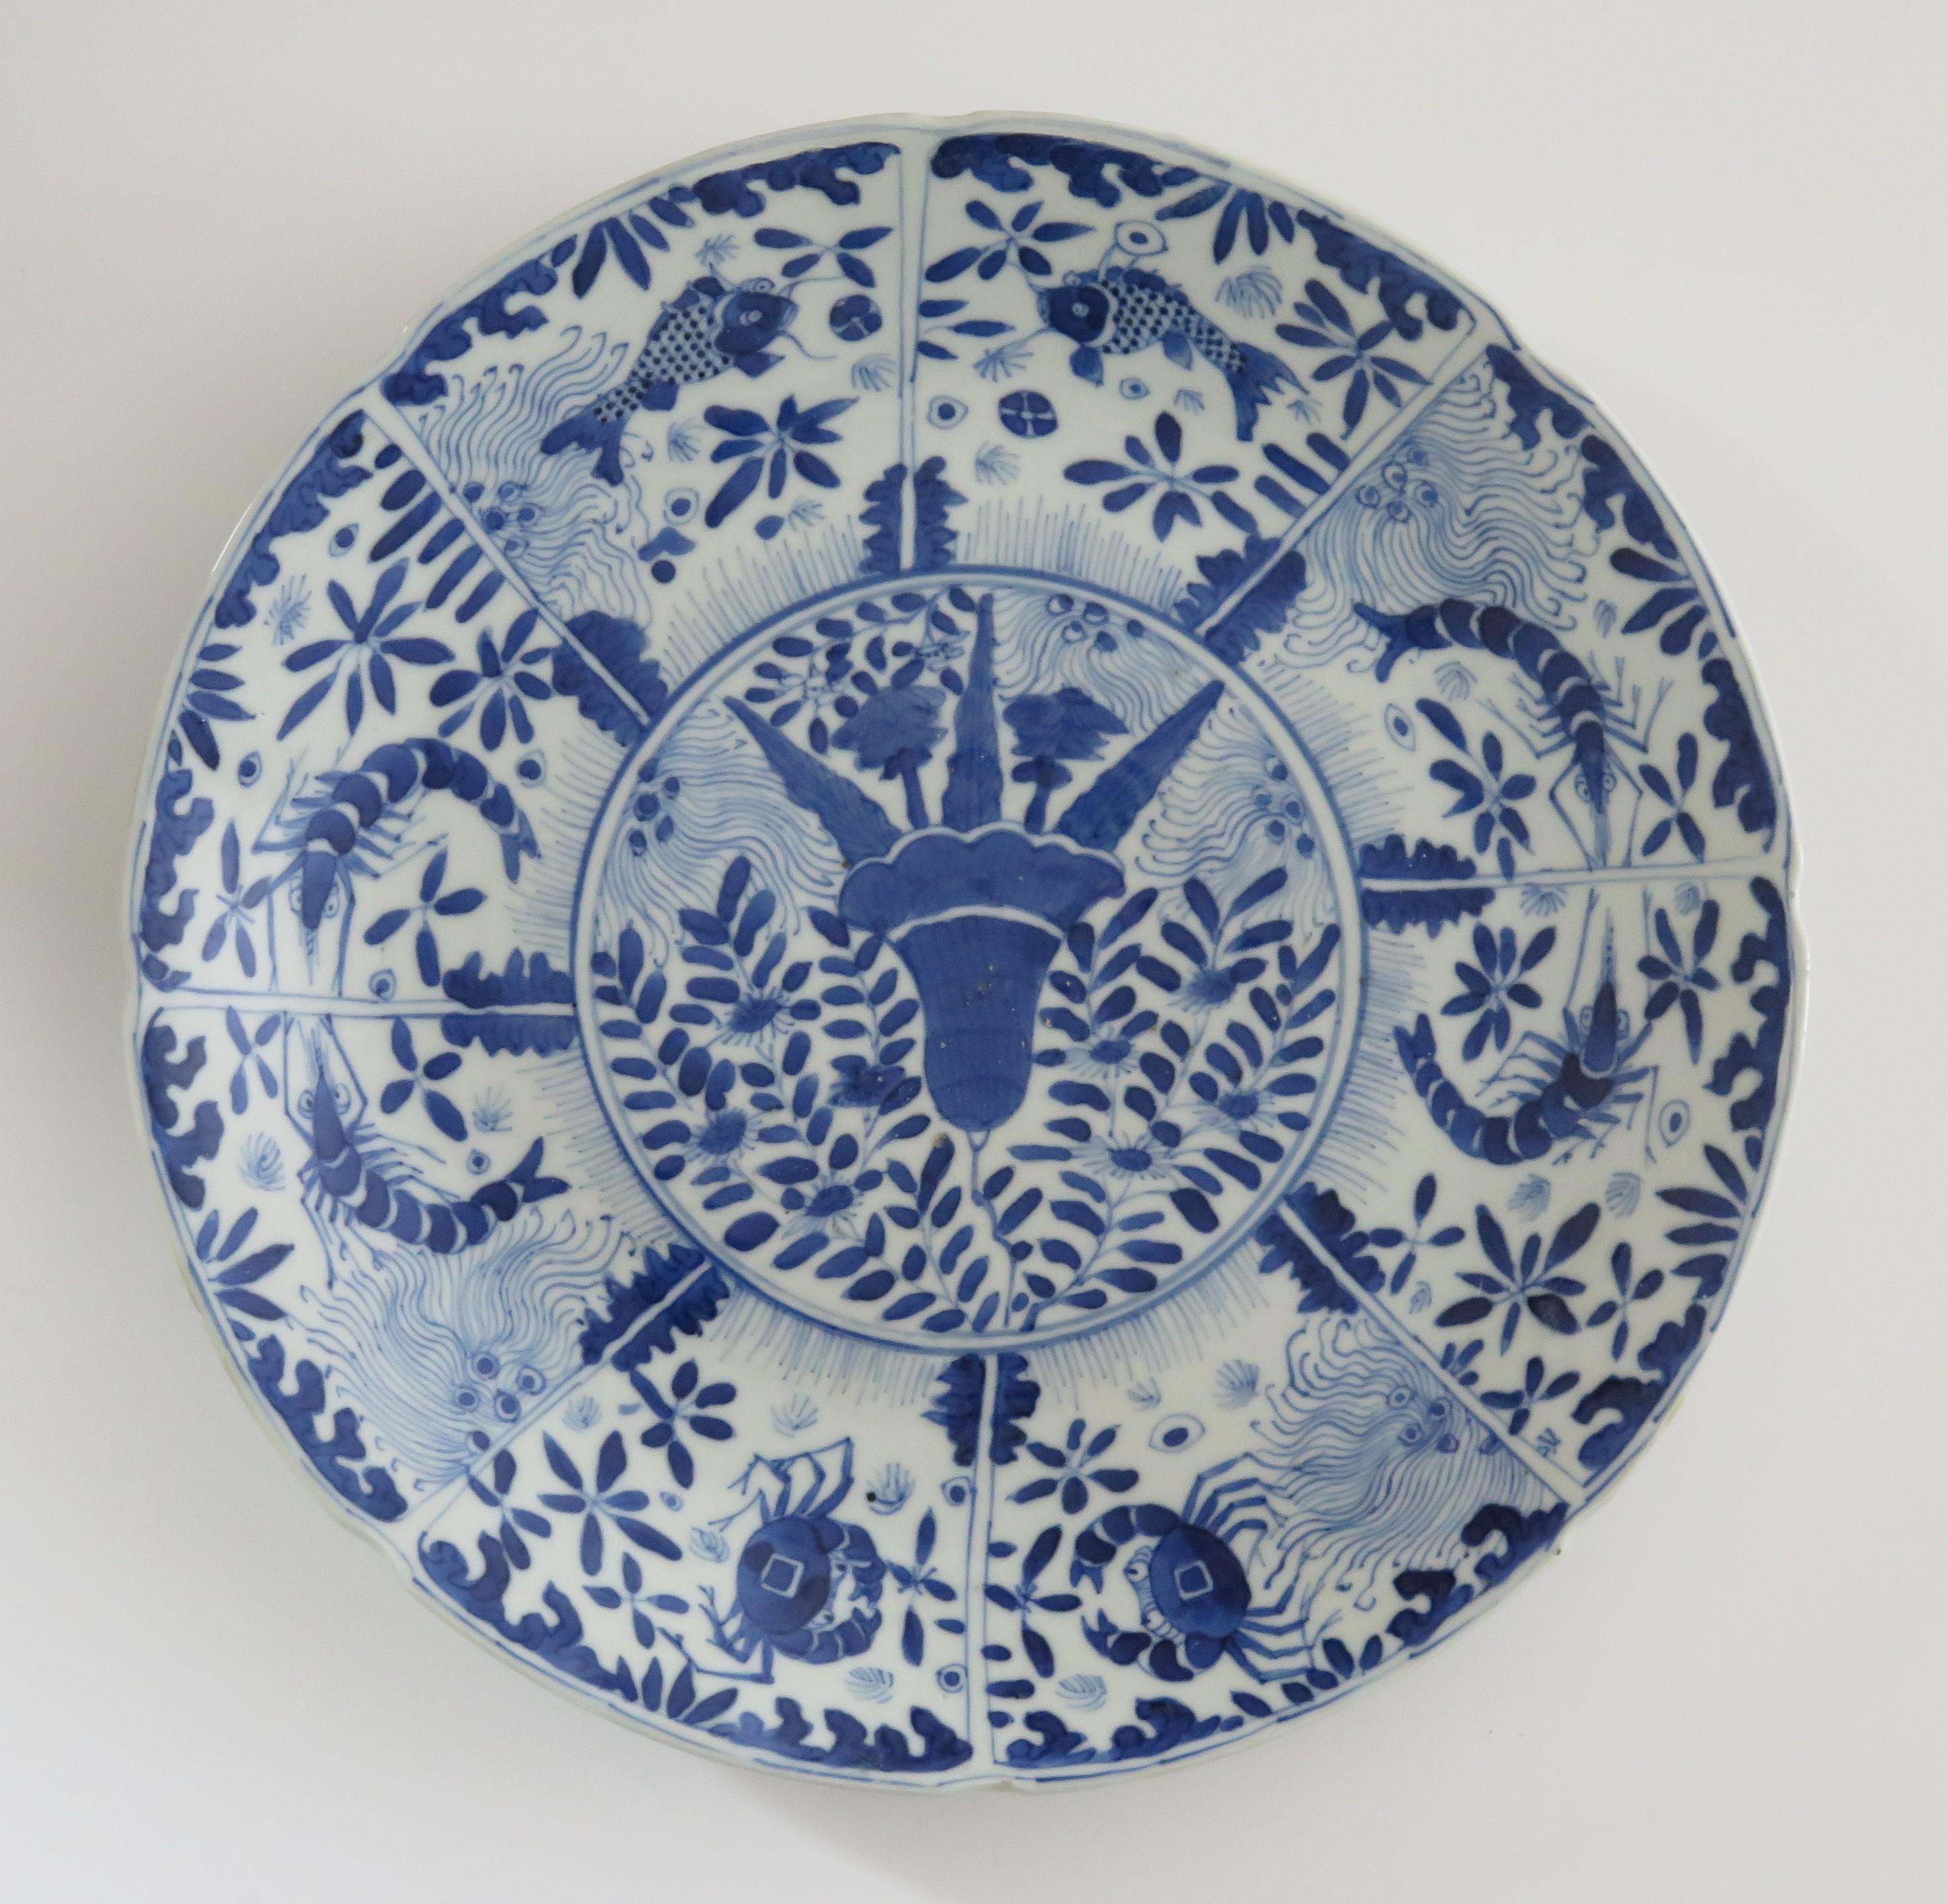 This is a beautiful hand painted, blue and white Chinese porcelain large diameter dish or plate, which we date to the early 19th century period of the Qing dynasty.

The plate is well potted with a notched outer rim and an eight section cavetto,